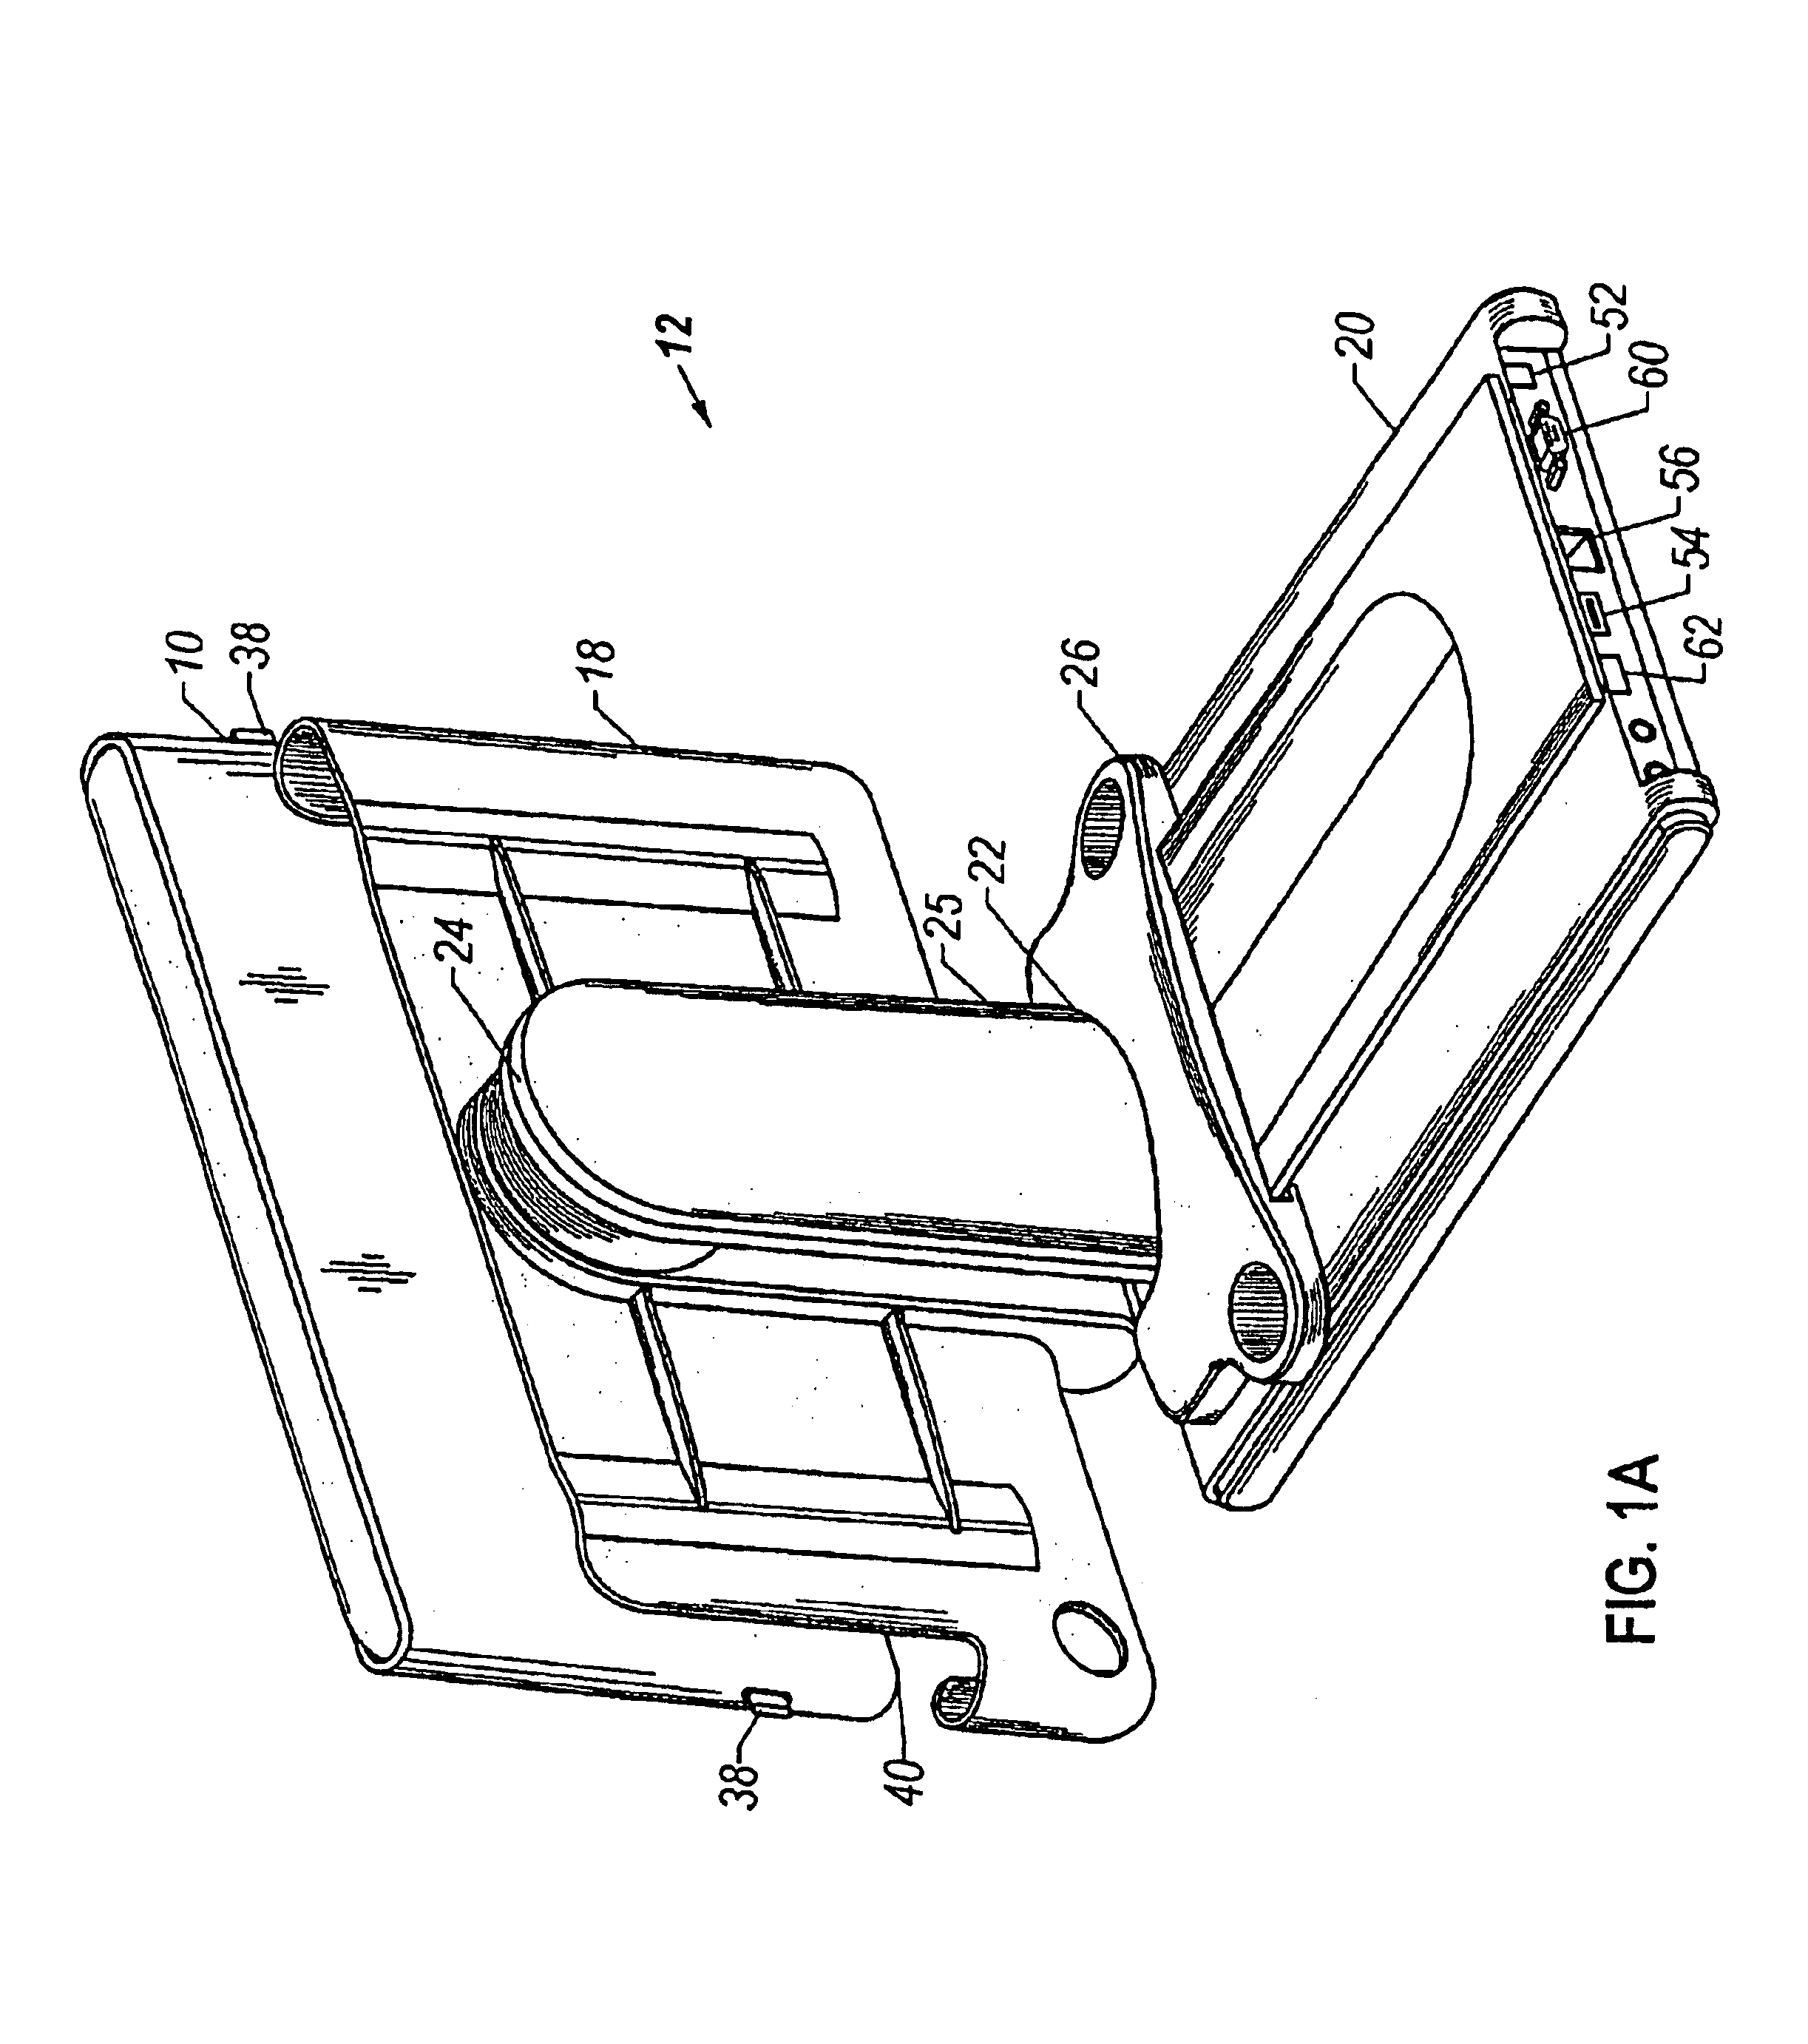 Flexible circuit board for tablet computing device